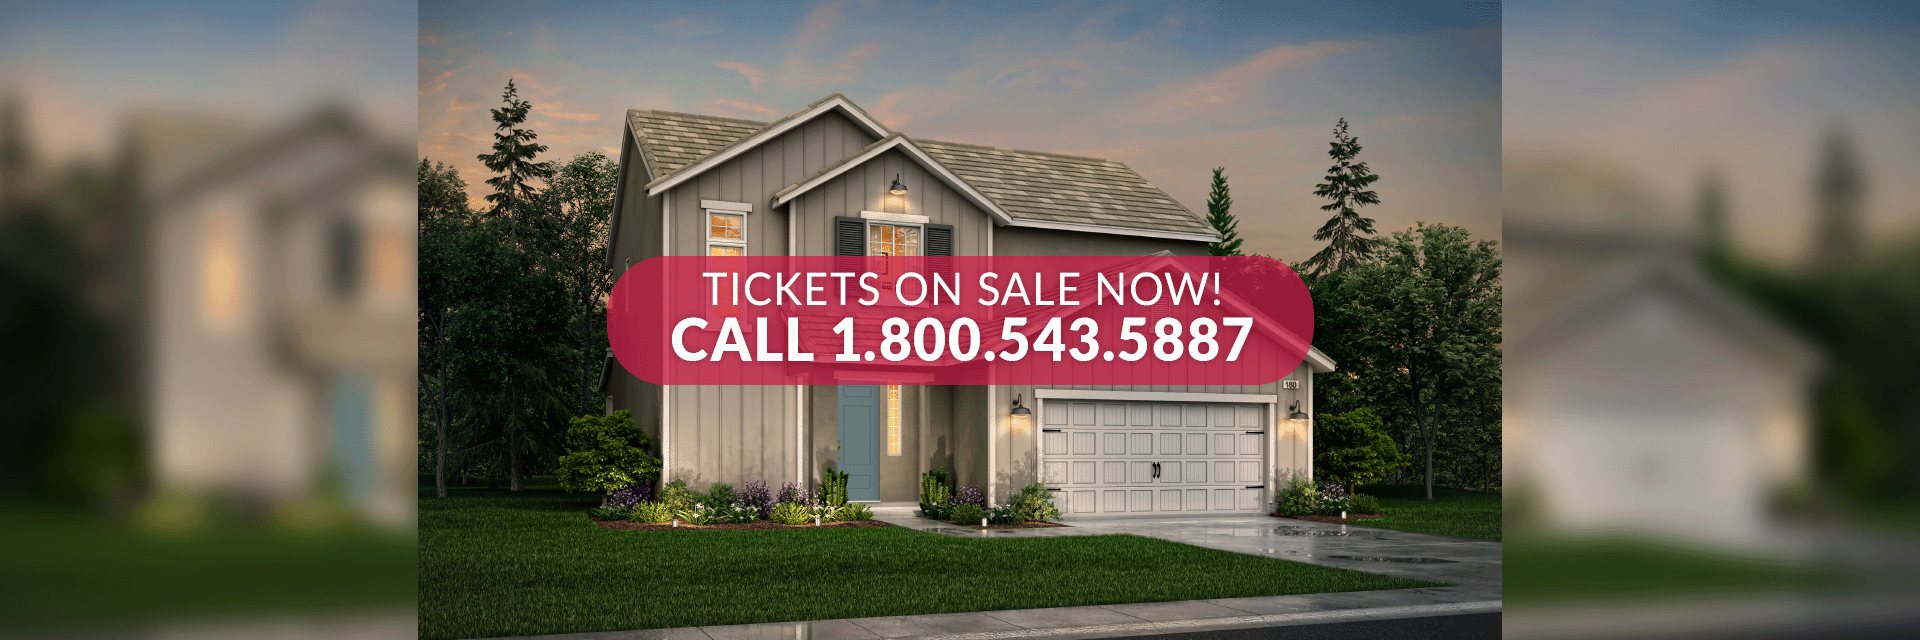 Tickets Now Available For The 2022 Central Valley St. Jude Dream Home® Giveaway! The Earlier You Reserve The More Prizes You Can Win!